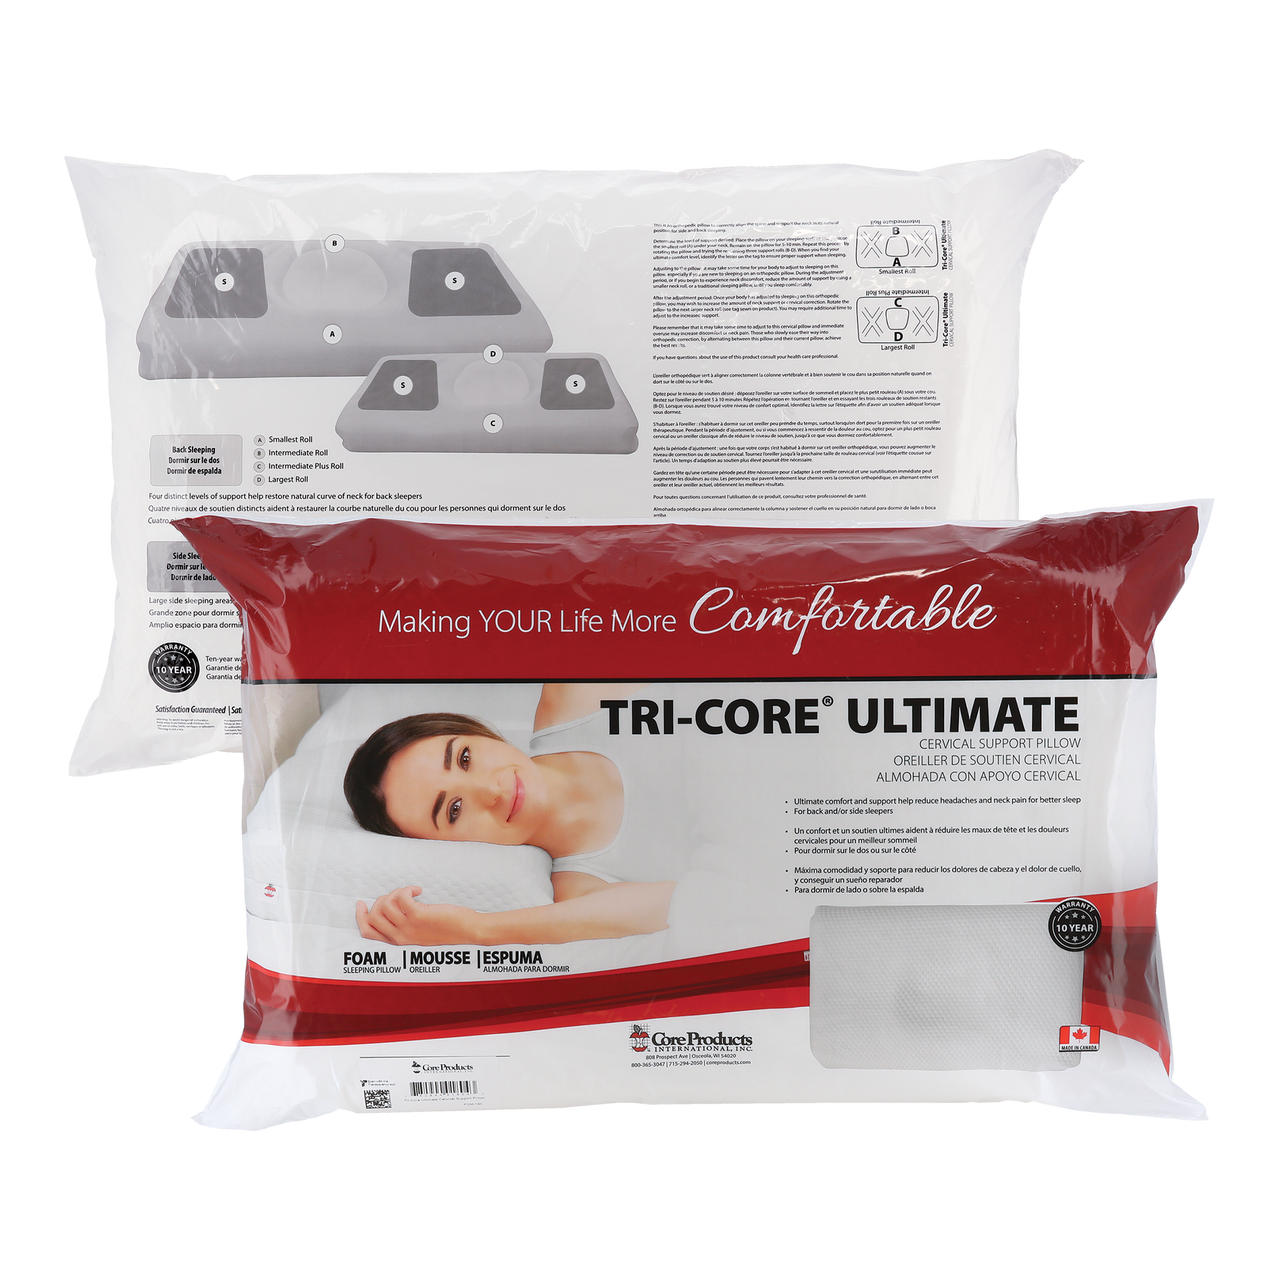 https://cdn11.bigcommerce.com/s-2dtht93jy3/images/stencil/1280x1280/products/1104/1777/fom-180-tri-core-ultimate-foam-cervical-support-pillow-packaging-combo-coreproducts_2000x2000_crop_center__61415.1611170903.png?c=2?imbypass=on